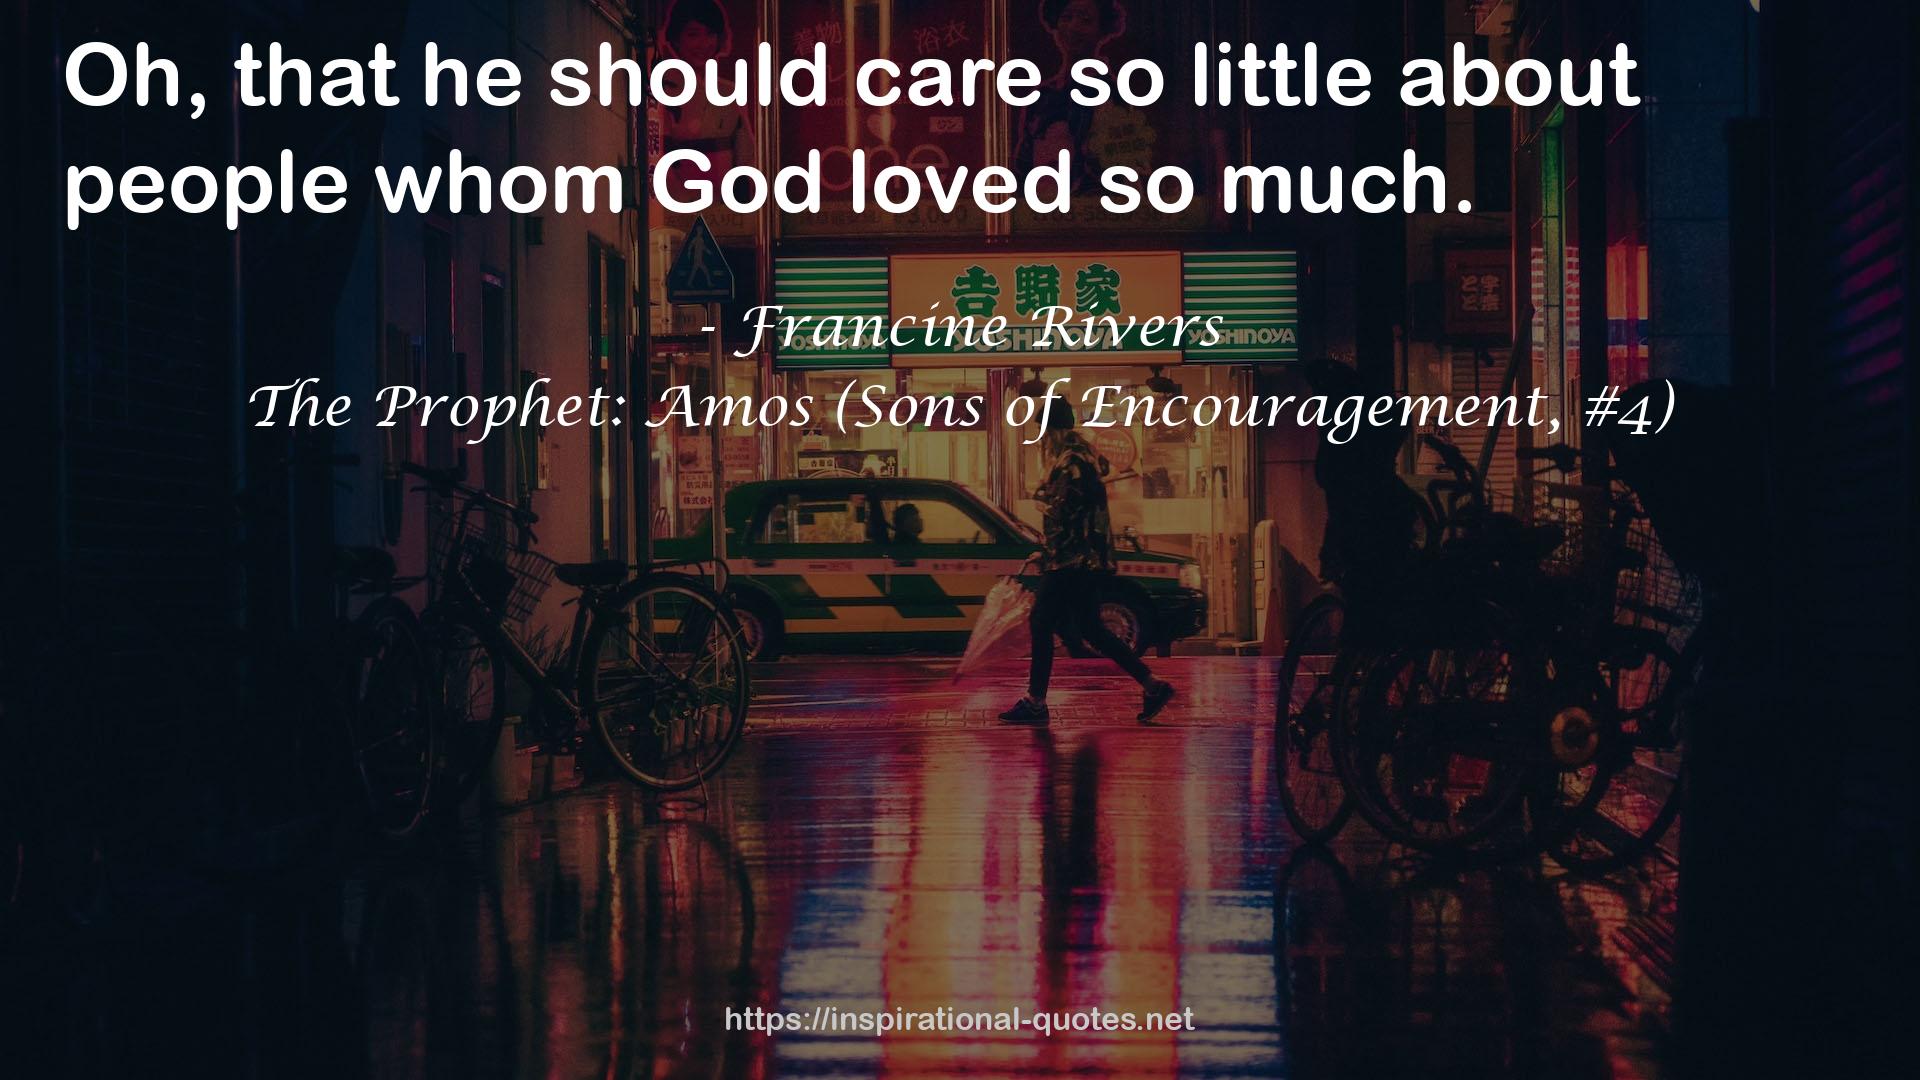 The Prophet: Amos (Sons of Encouragement, #4) QUOTES